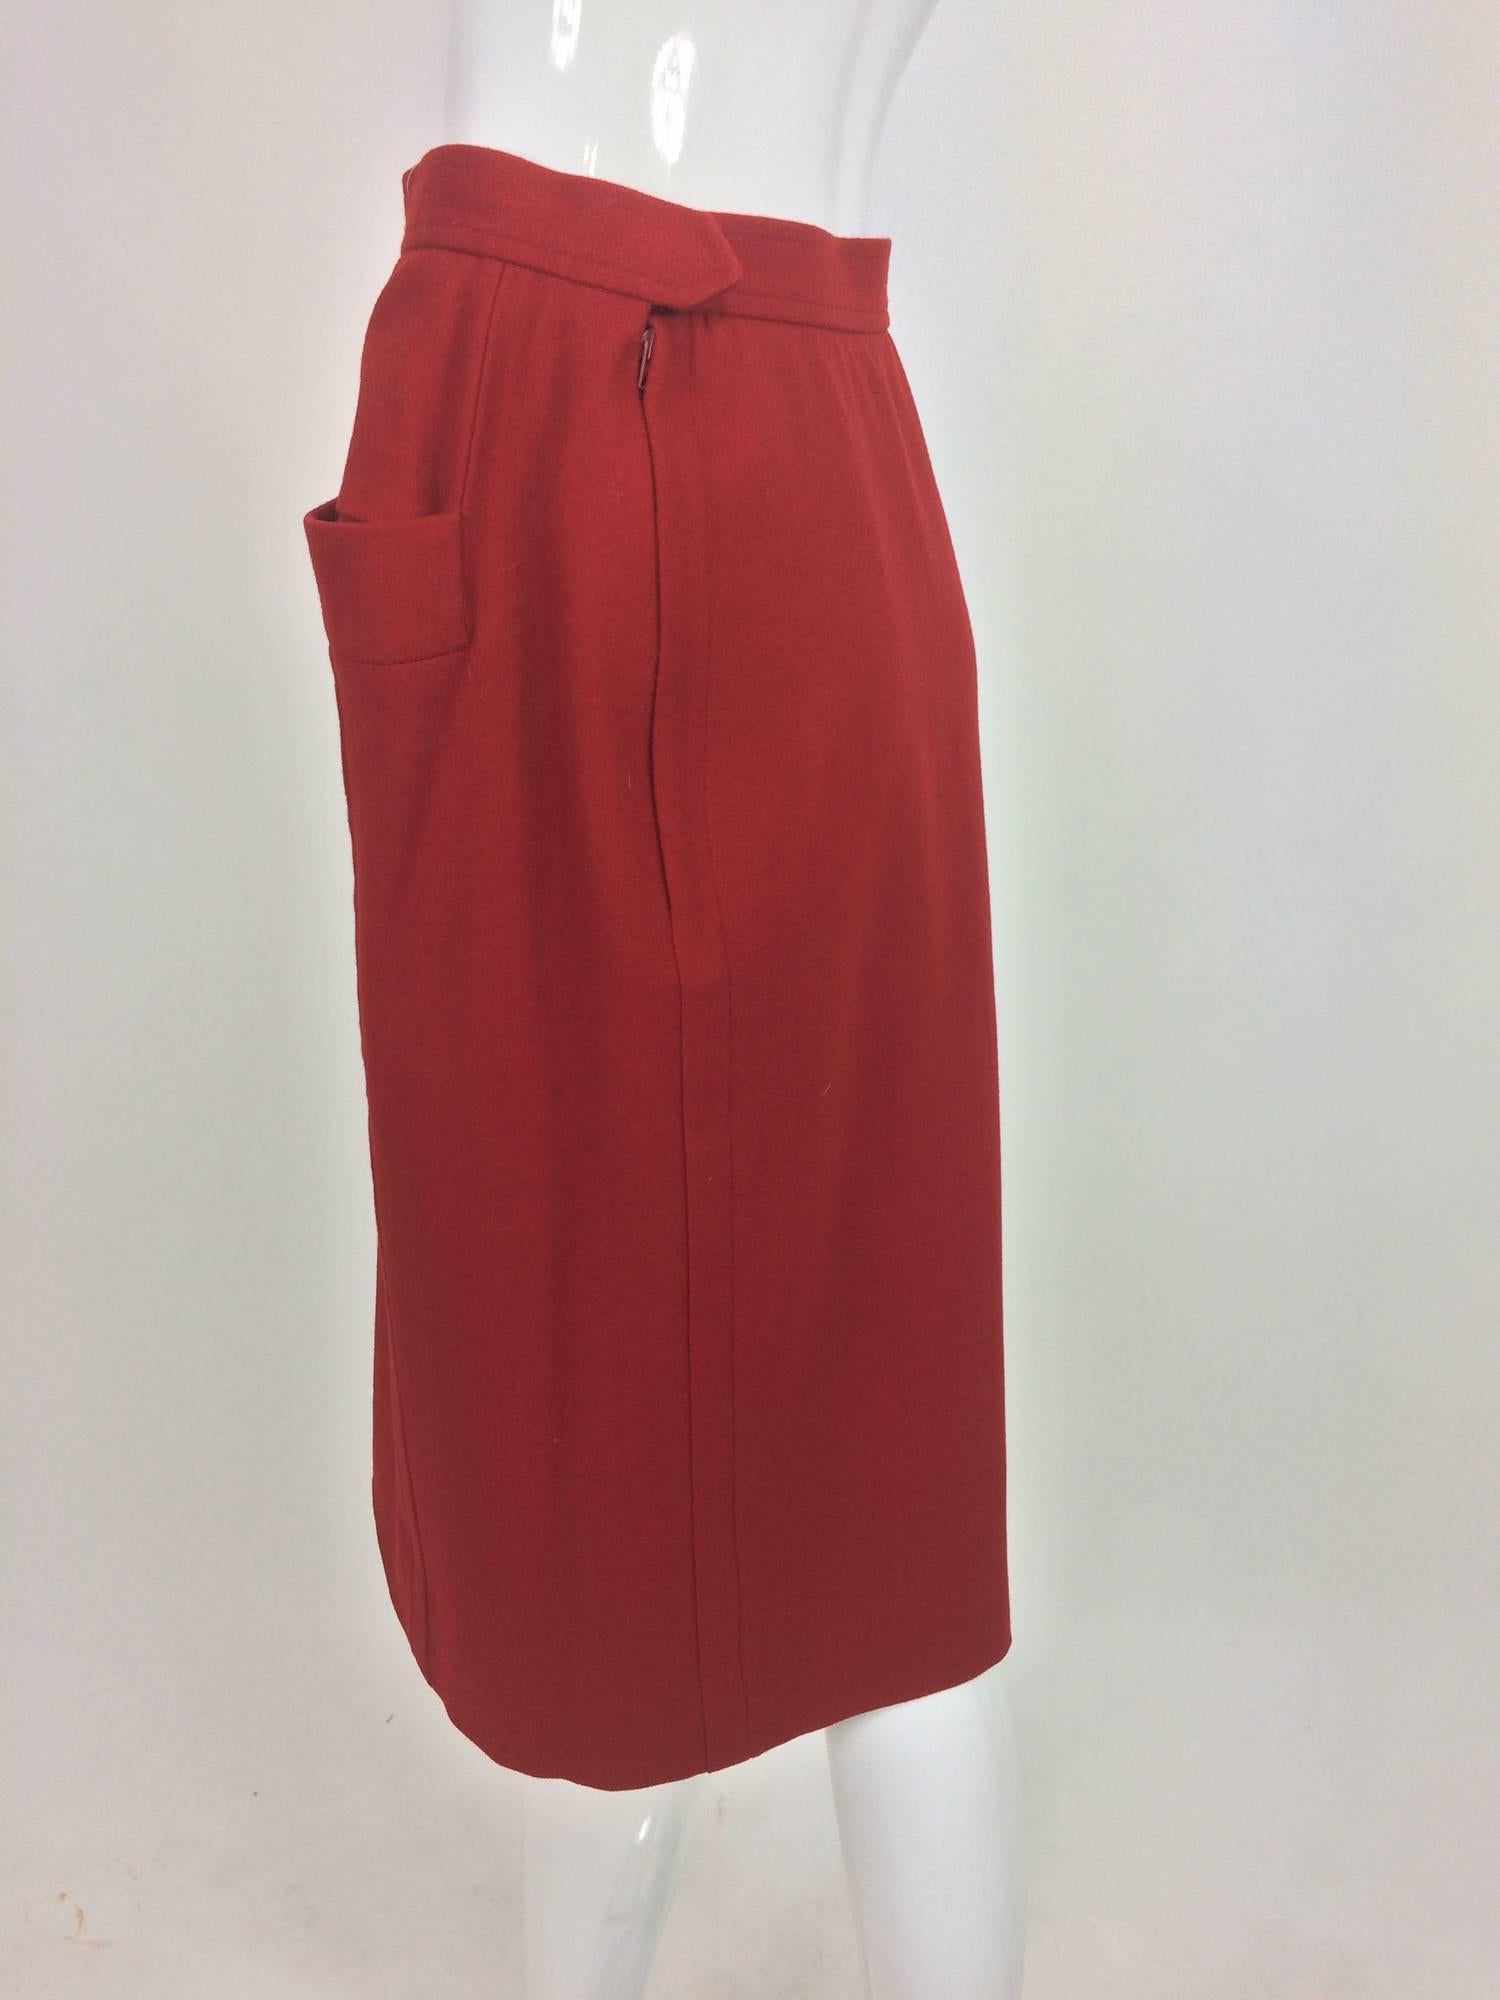 Women's Vintage Yves Saint Laurent brick red wool skirt with hip front pockets 1980s